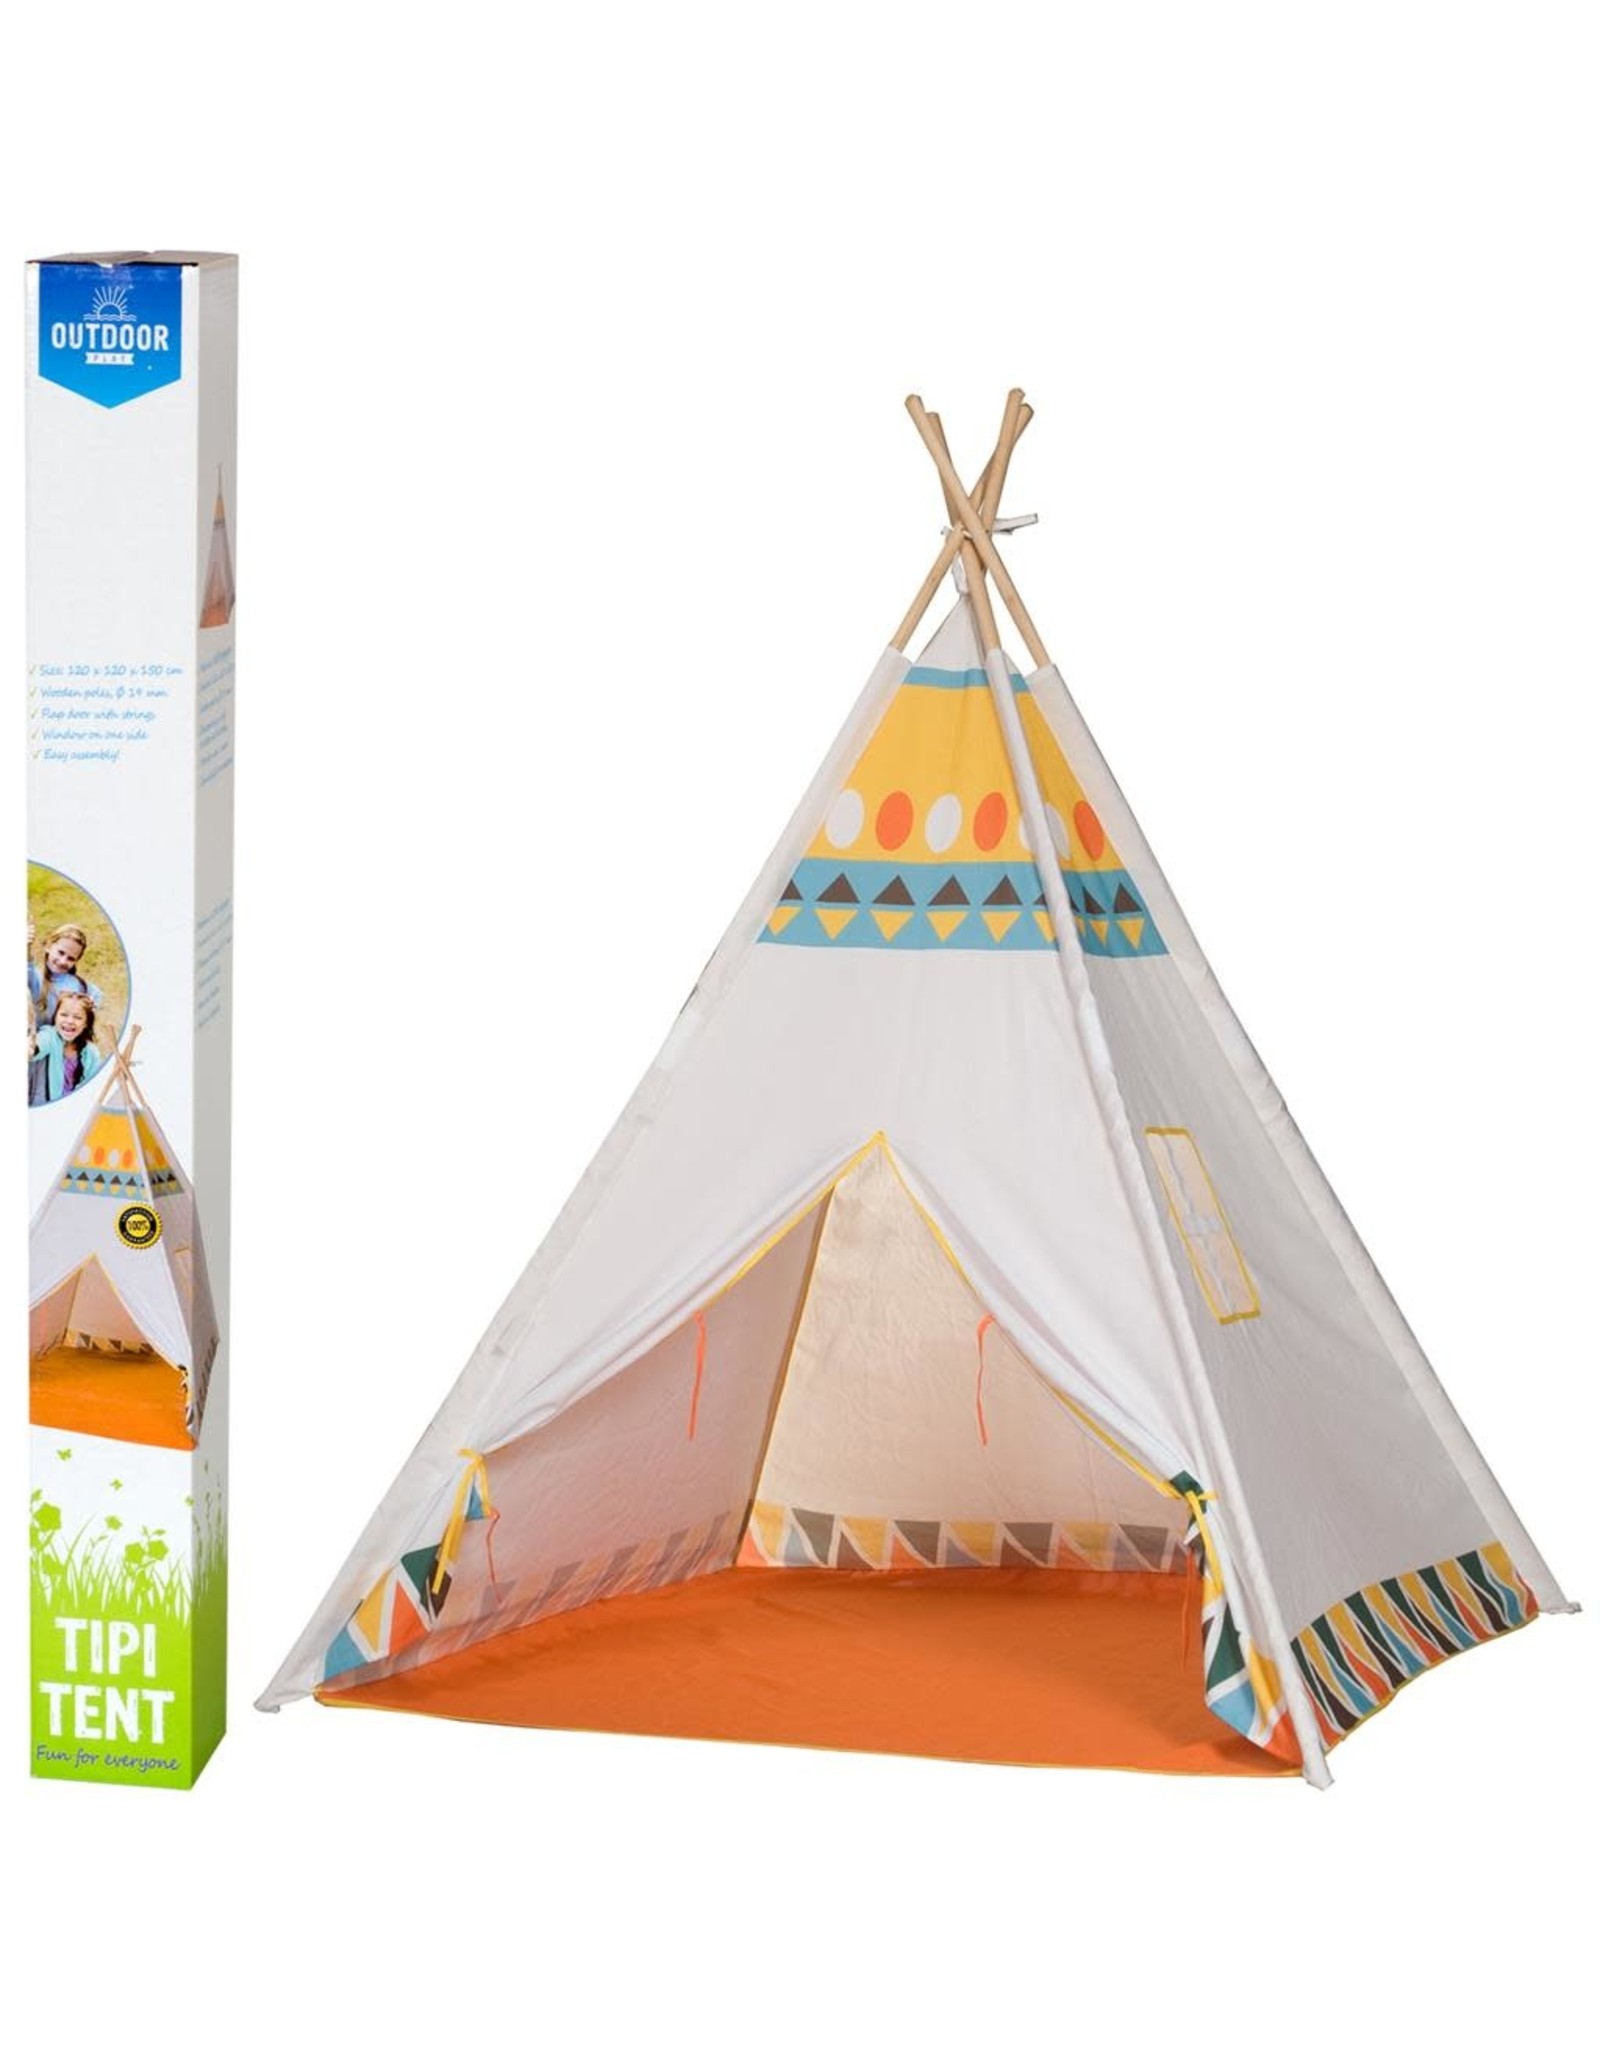 Outdoor Play Outdoor Play Tipi Tent